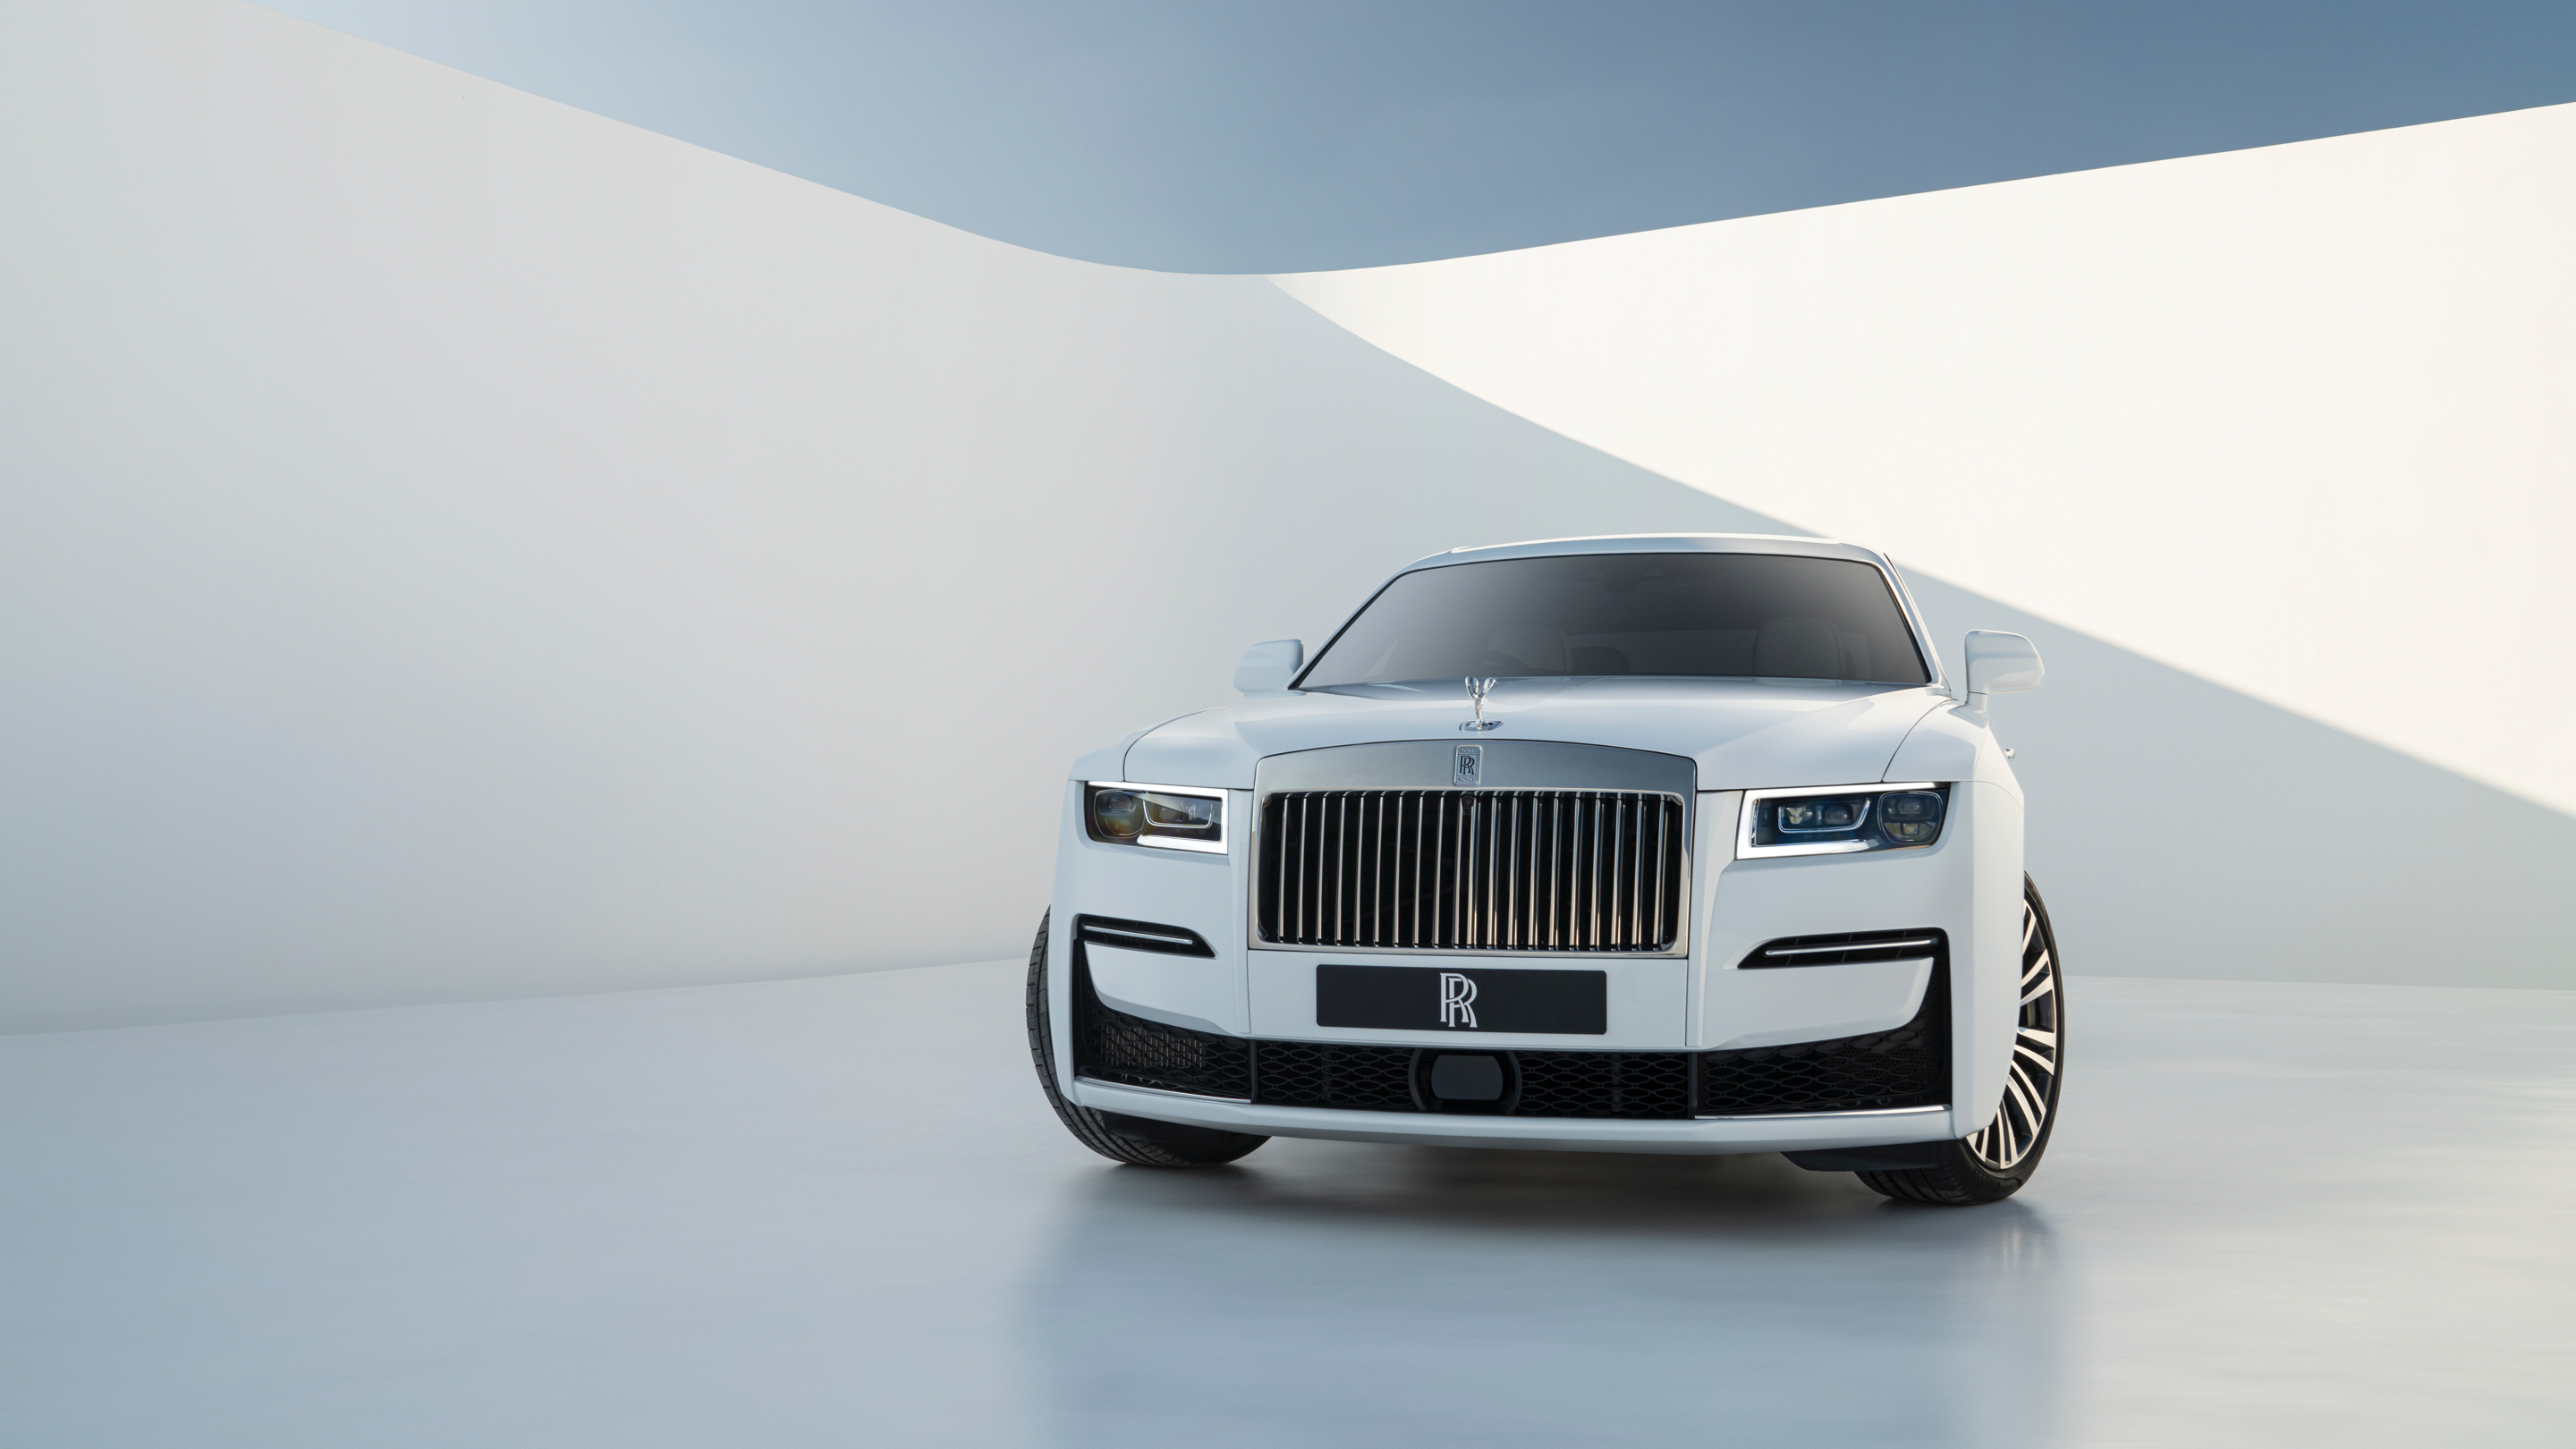 Tasteful Serenity Is the Goal of the New RollsRoyce Ghost  Barrons